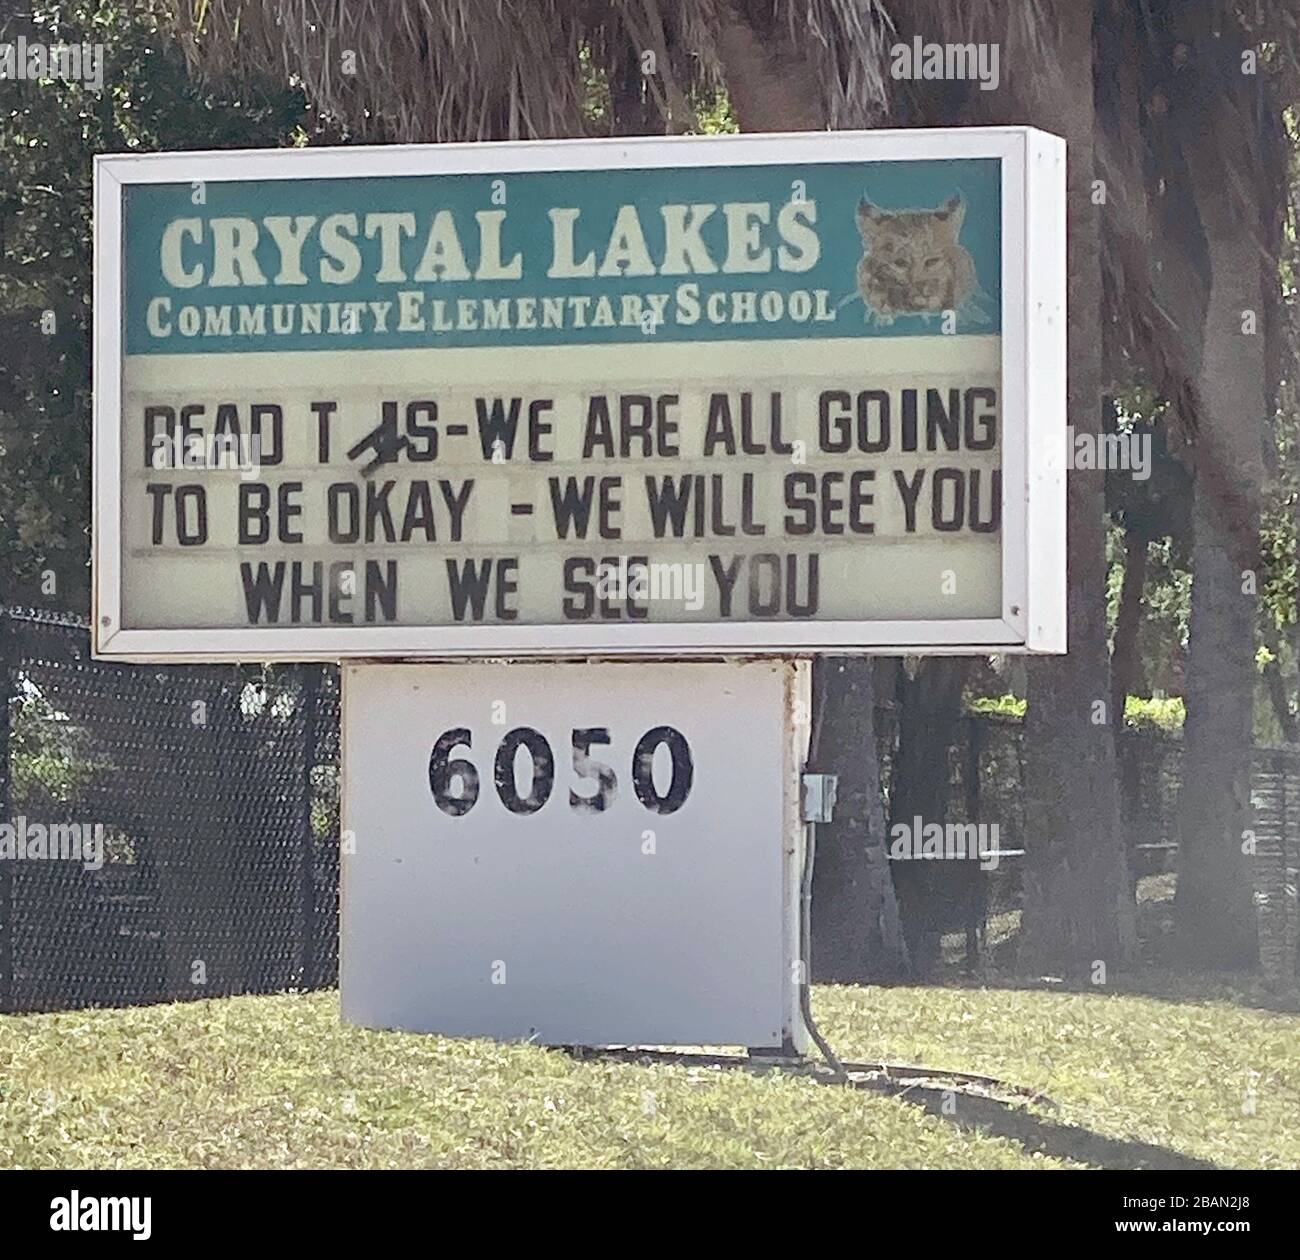 Florida, USA. 28th Mar, 2020. A message on the Crystal Lakes elementary school notice board Informs students that 'all will be okay' during the school closing due to the Coronavirus fears in Boynton Beach, Florida on Saturday, March 28, 2020. The Florida Surgeon General put out a public service alert that all residents 65  or have medical conditions should stay at home no matter what their age.Spending time with family at home and keeping a social distance from friends will help in the fight against the Coronavirus outbreak. Credit: UPI/Alamy Live News Stock Photo